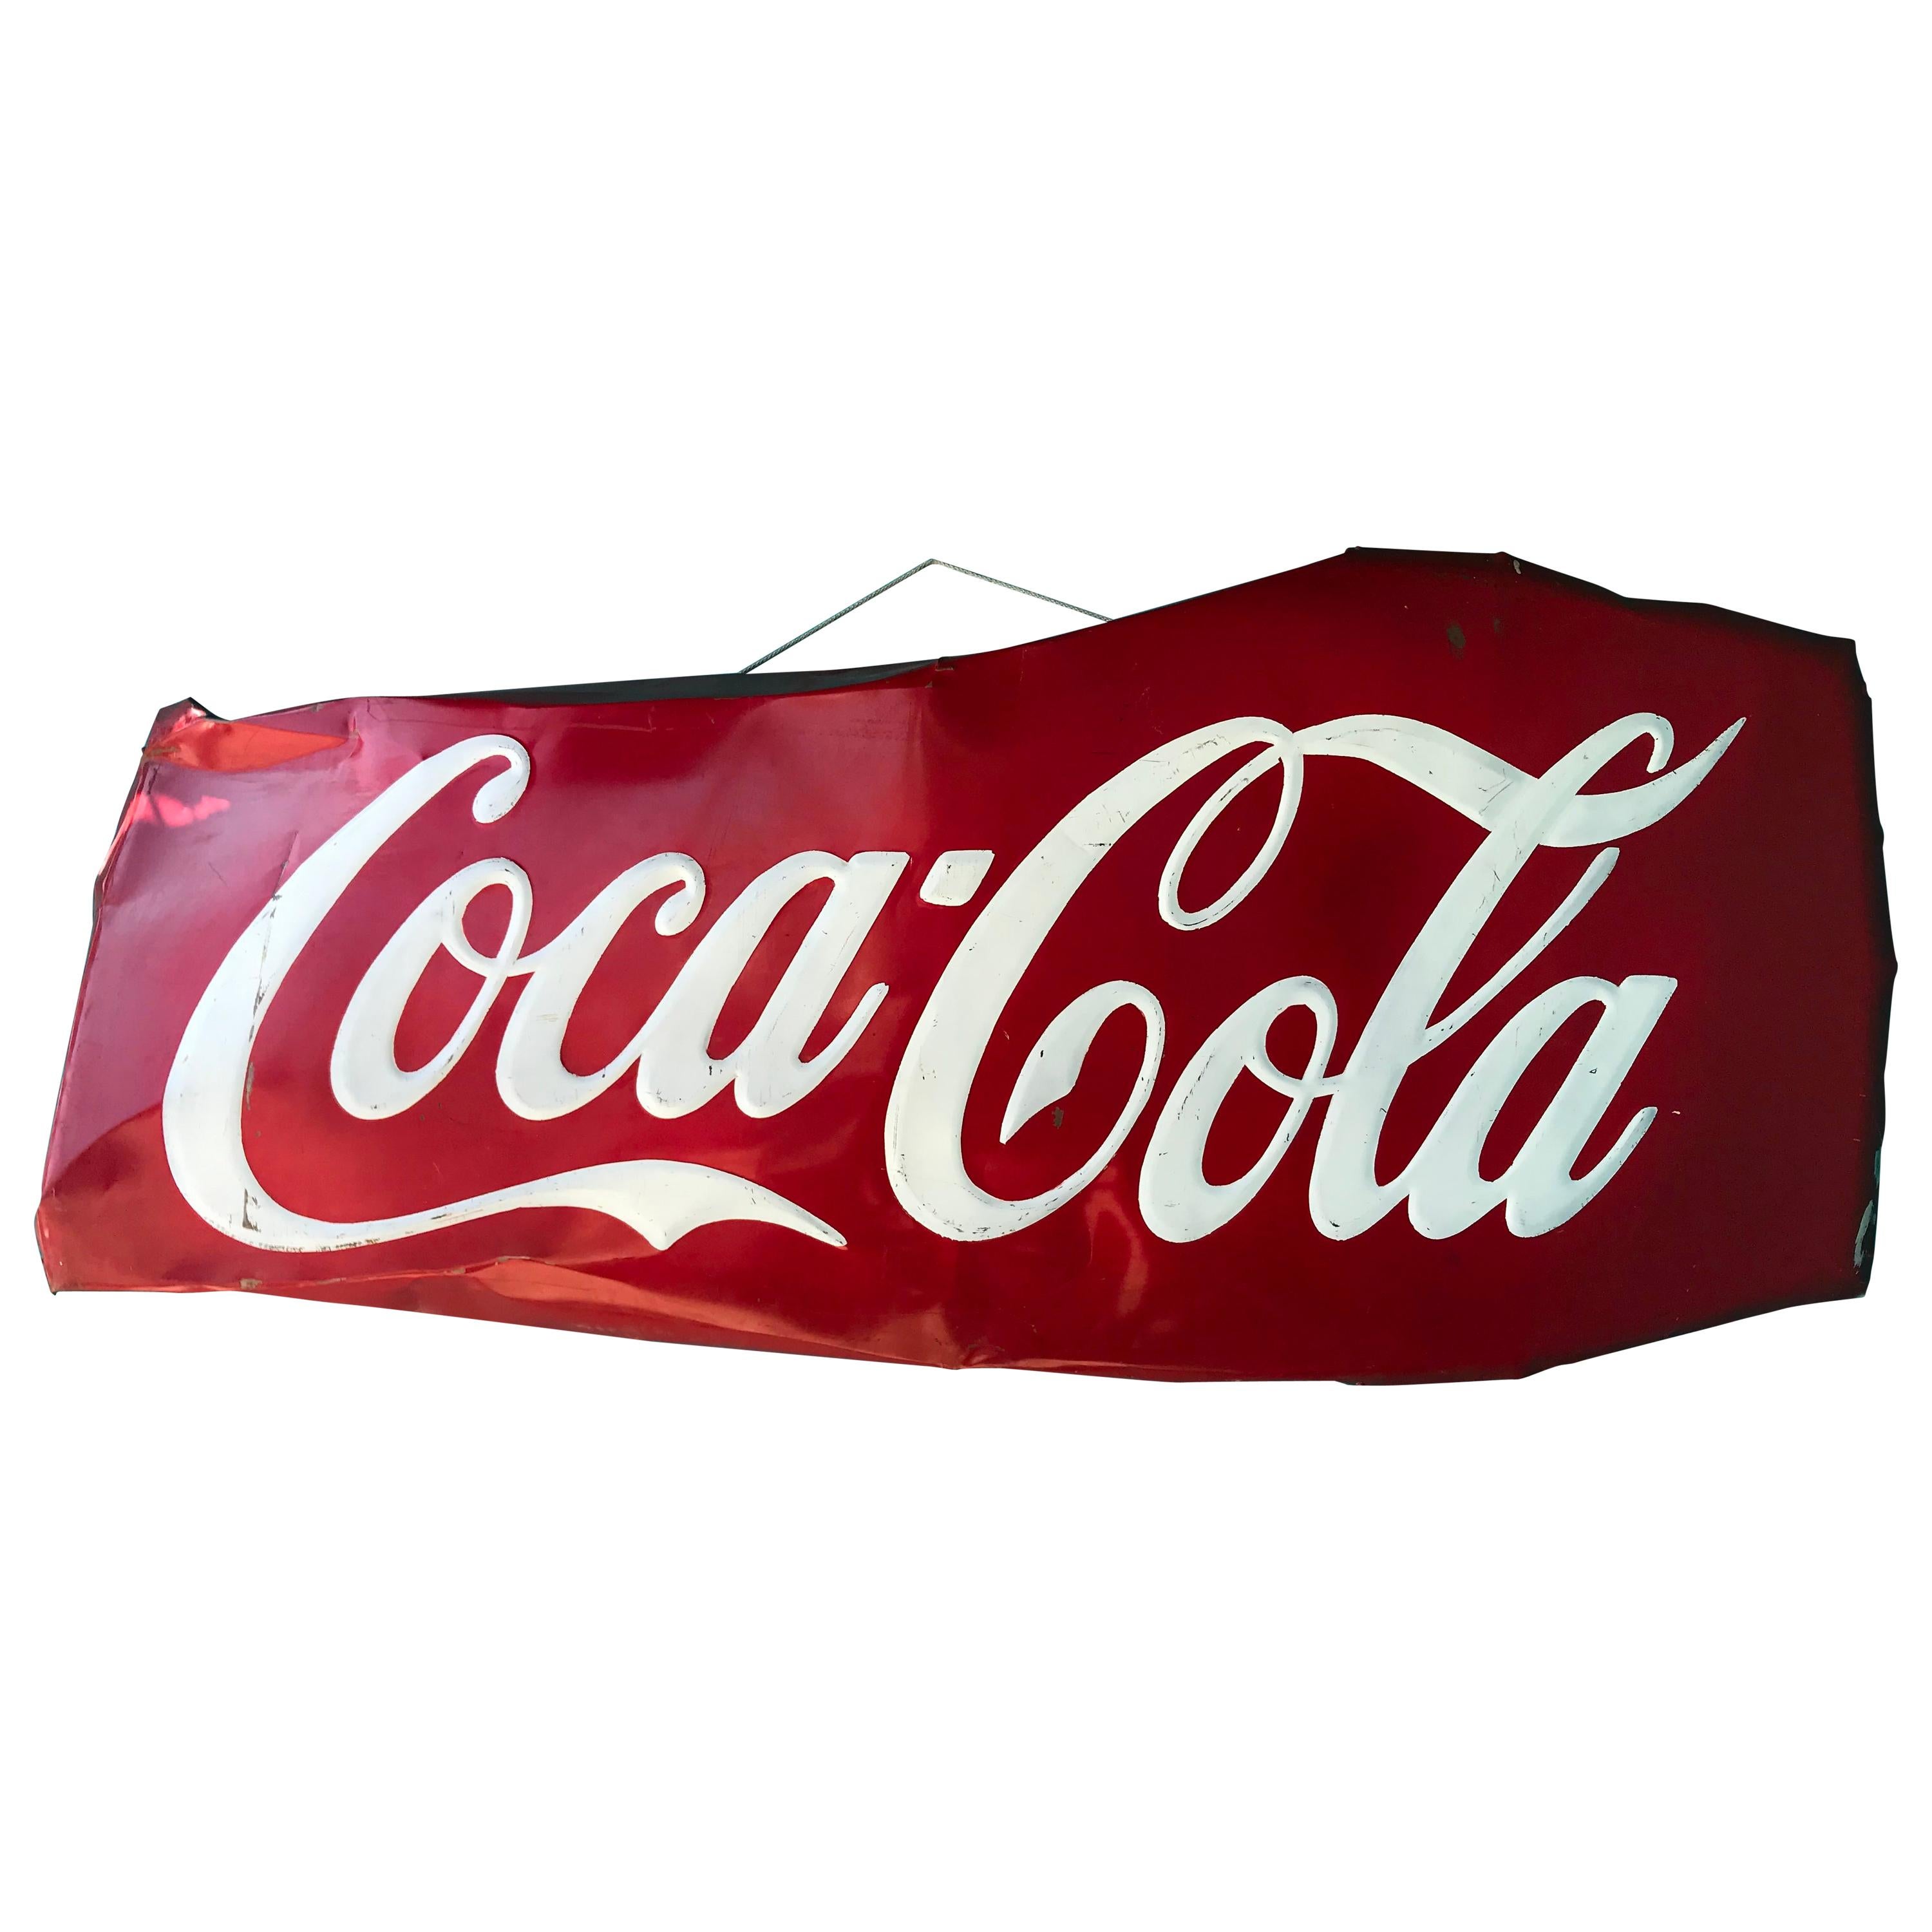 Monumental 7ft Mexican Coca Cola Advertising Porcelain Sign, 1960s